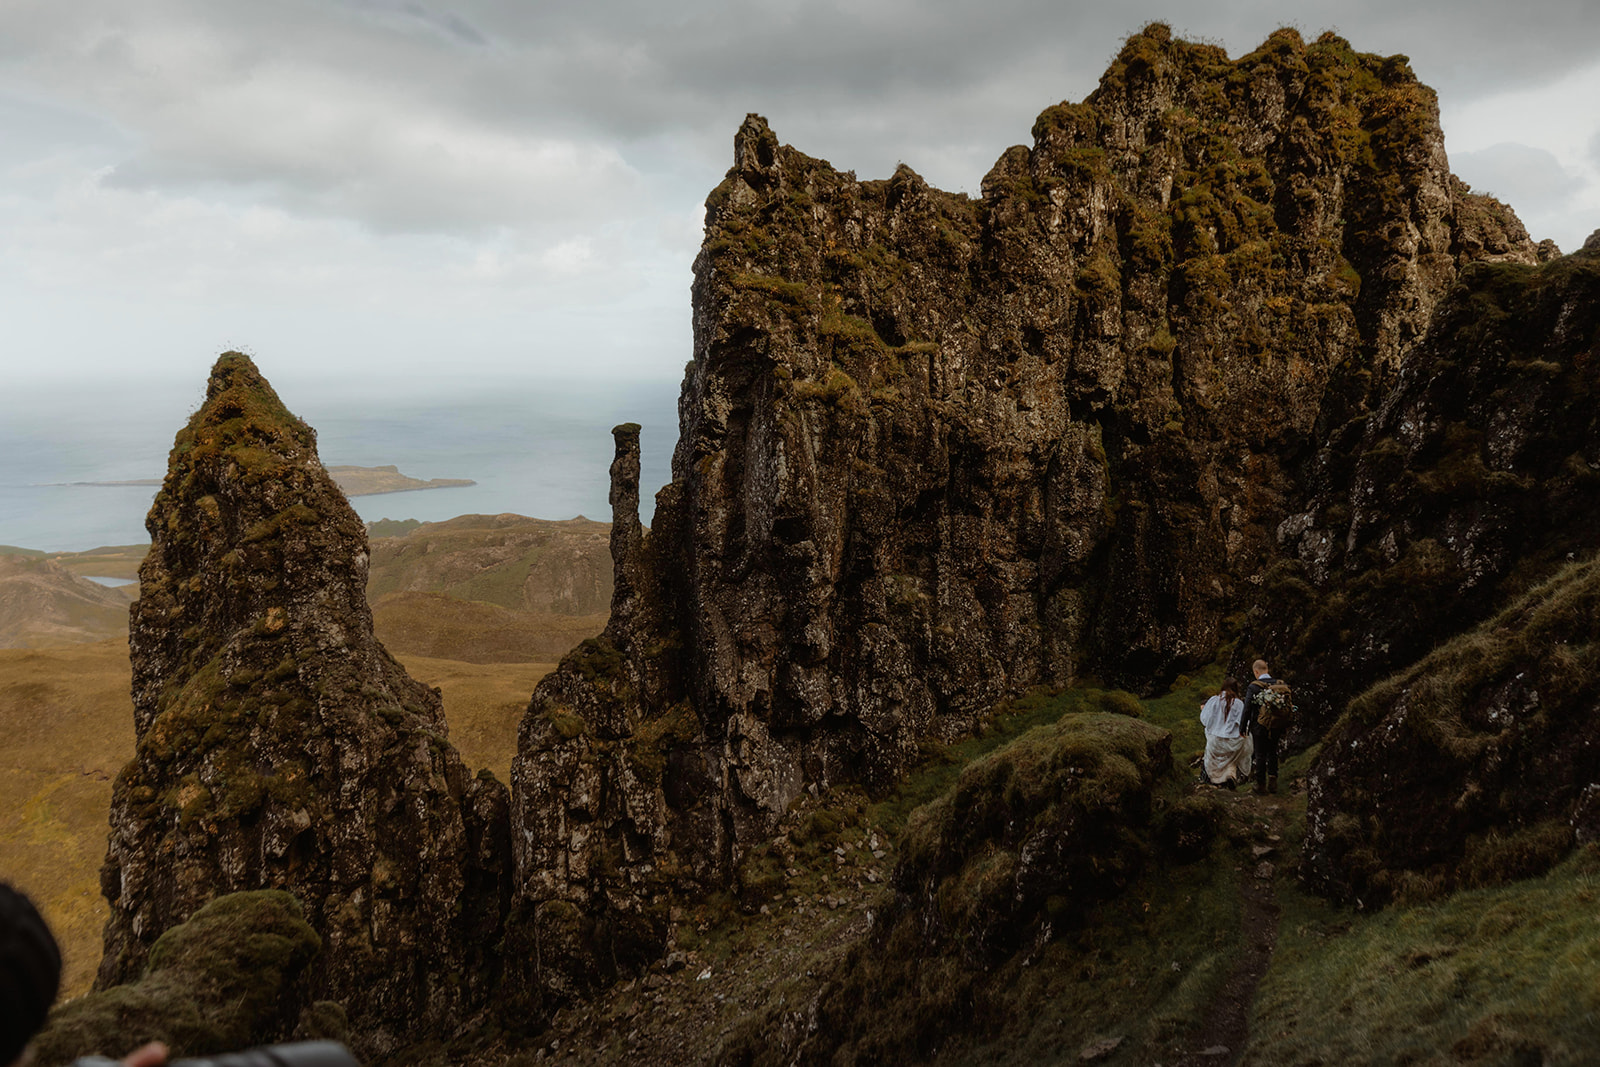 Emma and Matthew shared an intimate moment as they hike down after their Isle of Skye elopement ceremony